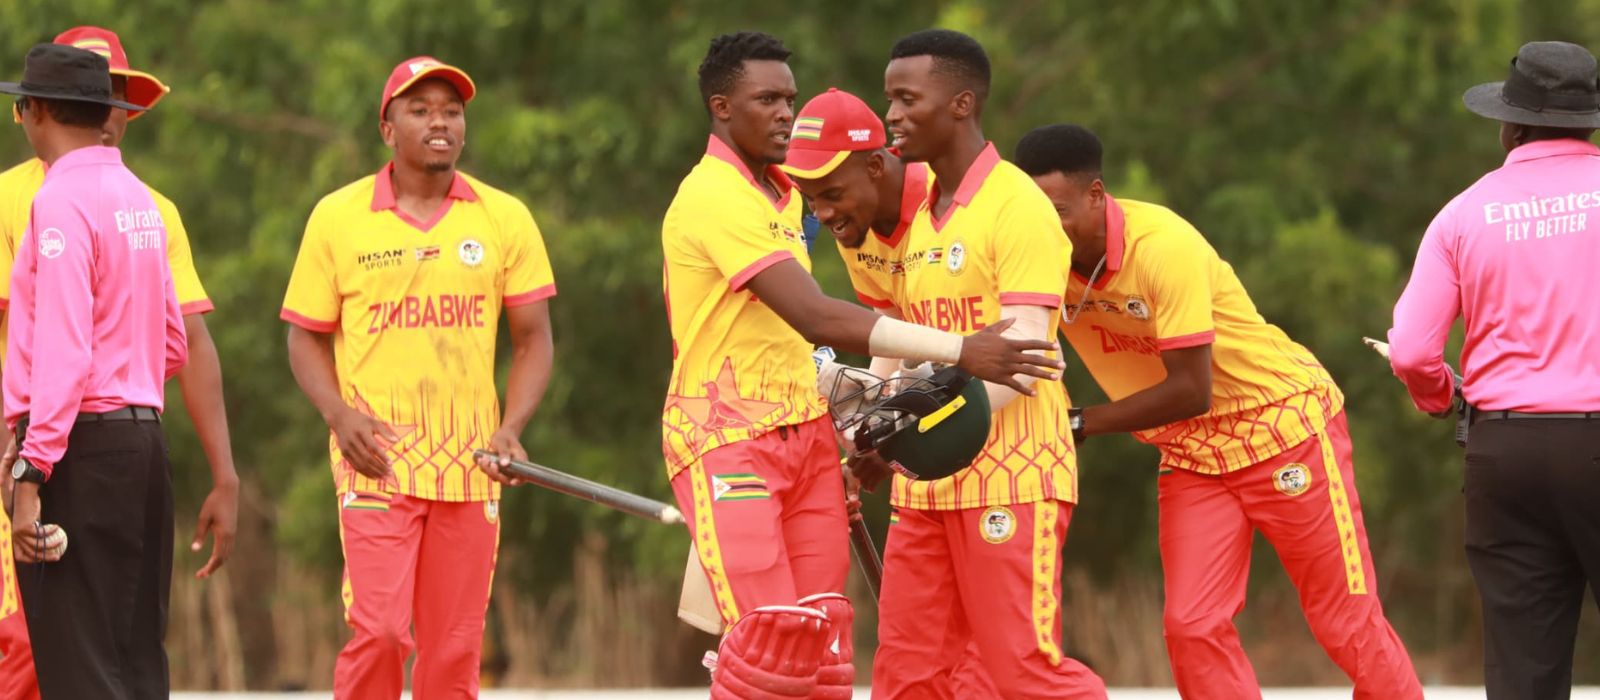 Zimbabwe cricket team makes history with double gold at the All Africa Games